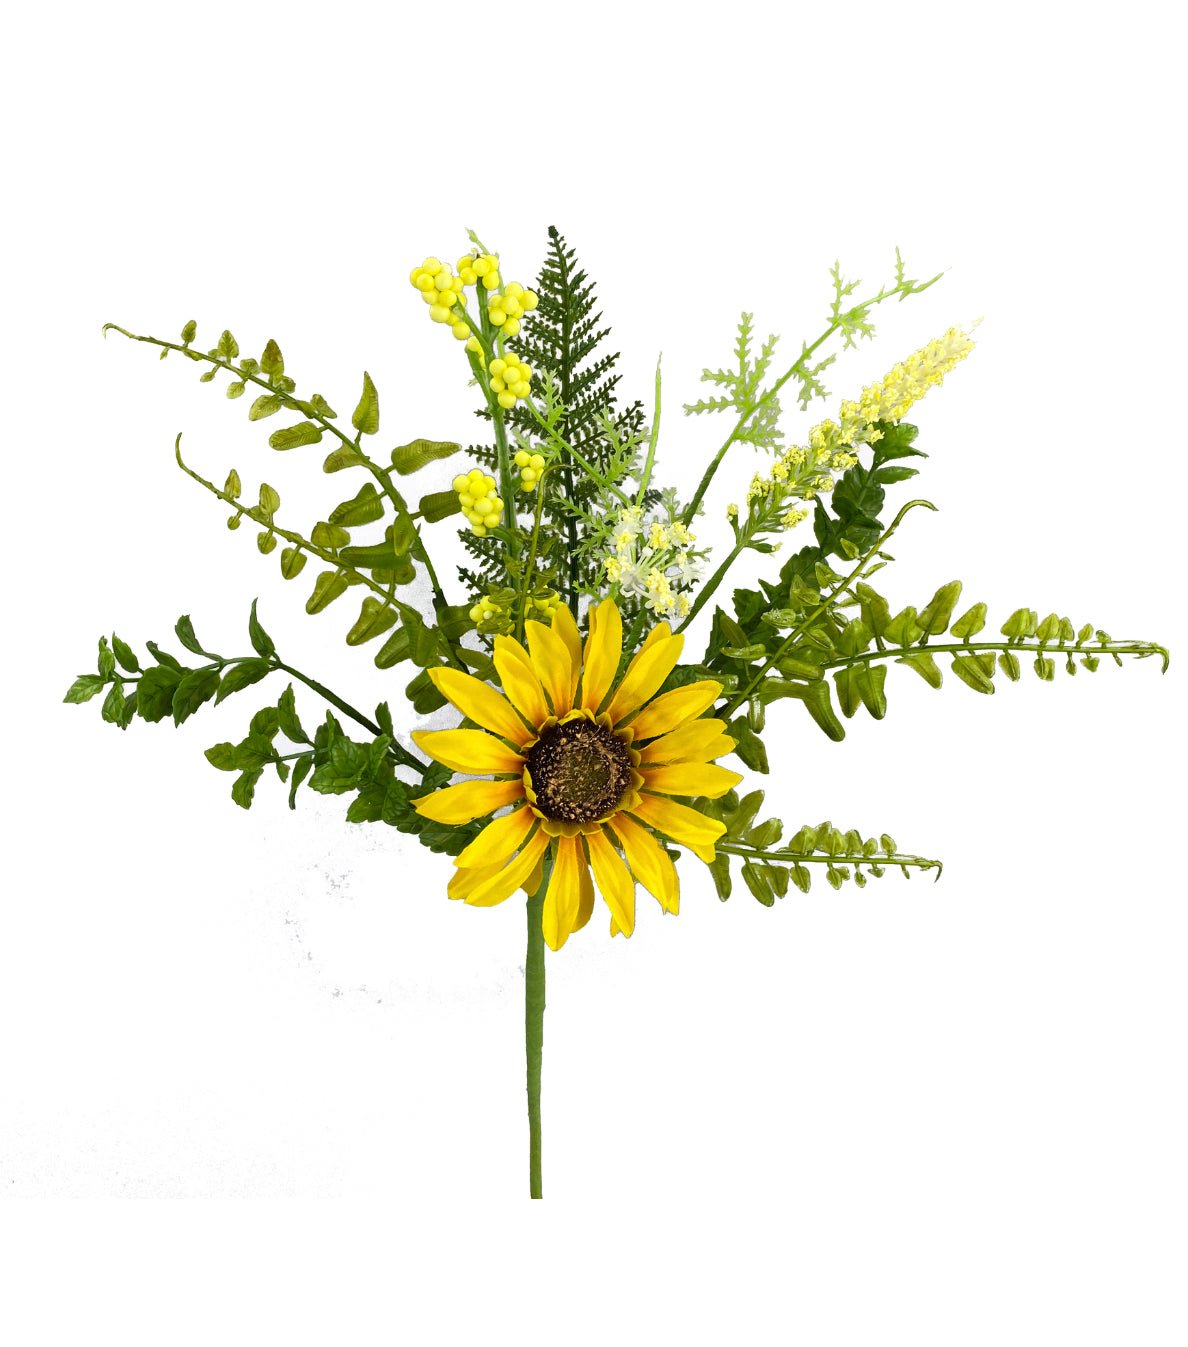 Artificial Sunflower and greenery pick - Greenery Market artificial flowers